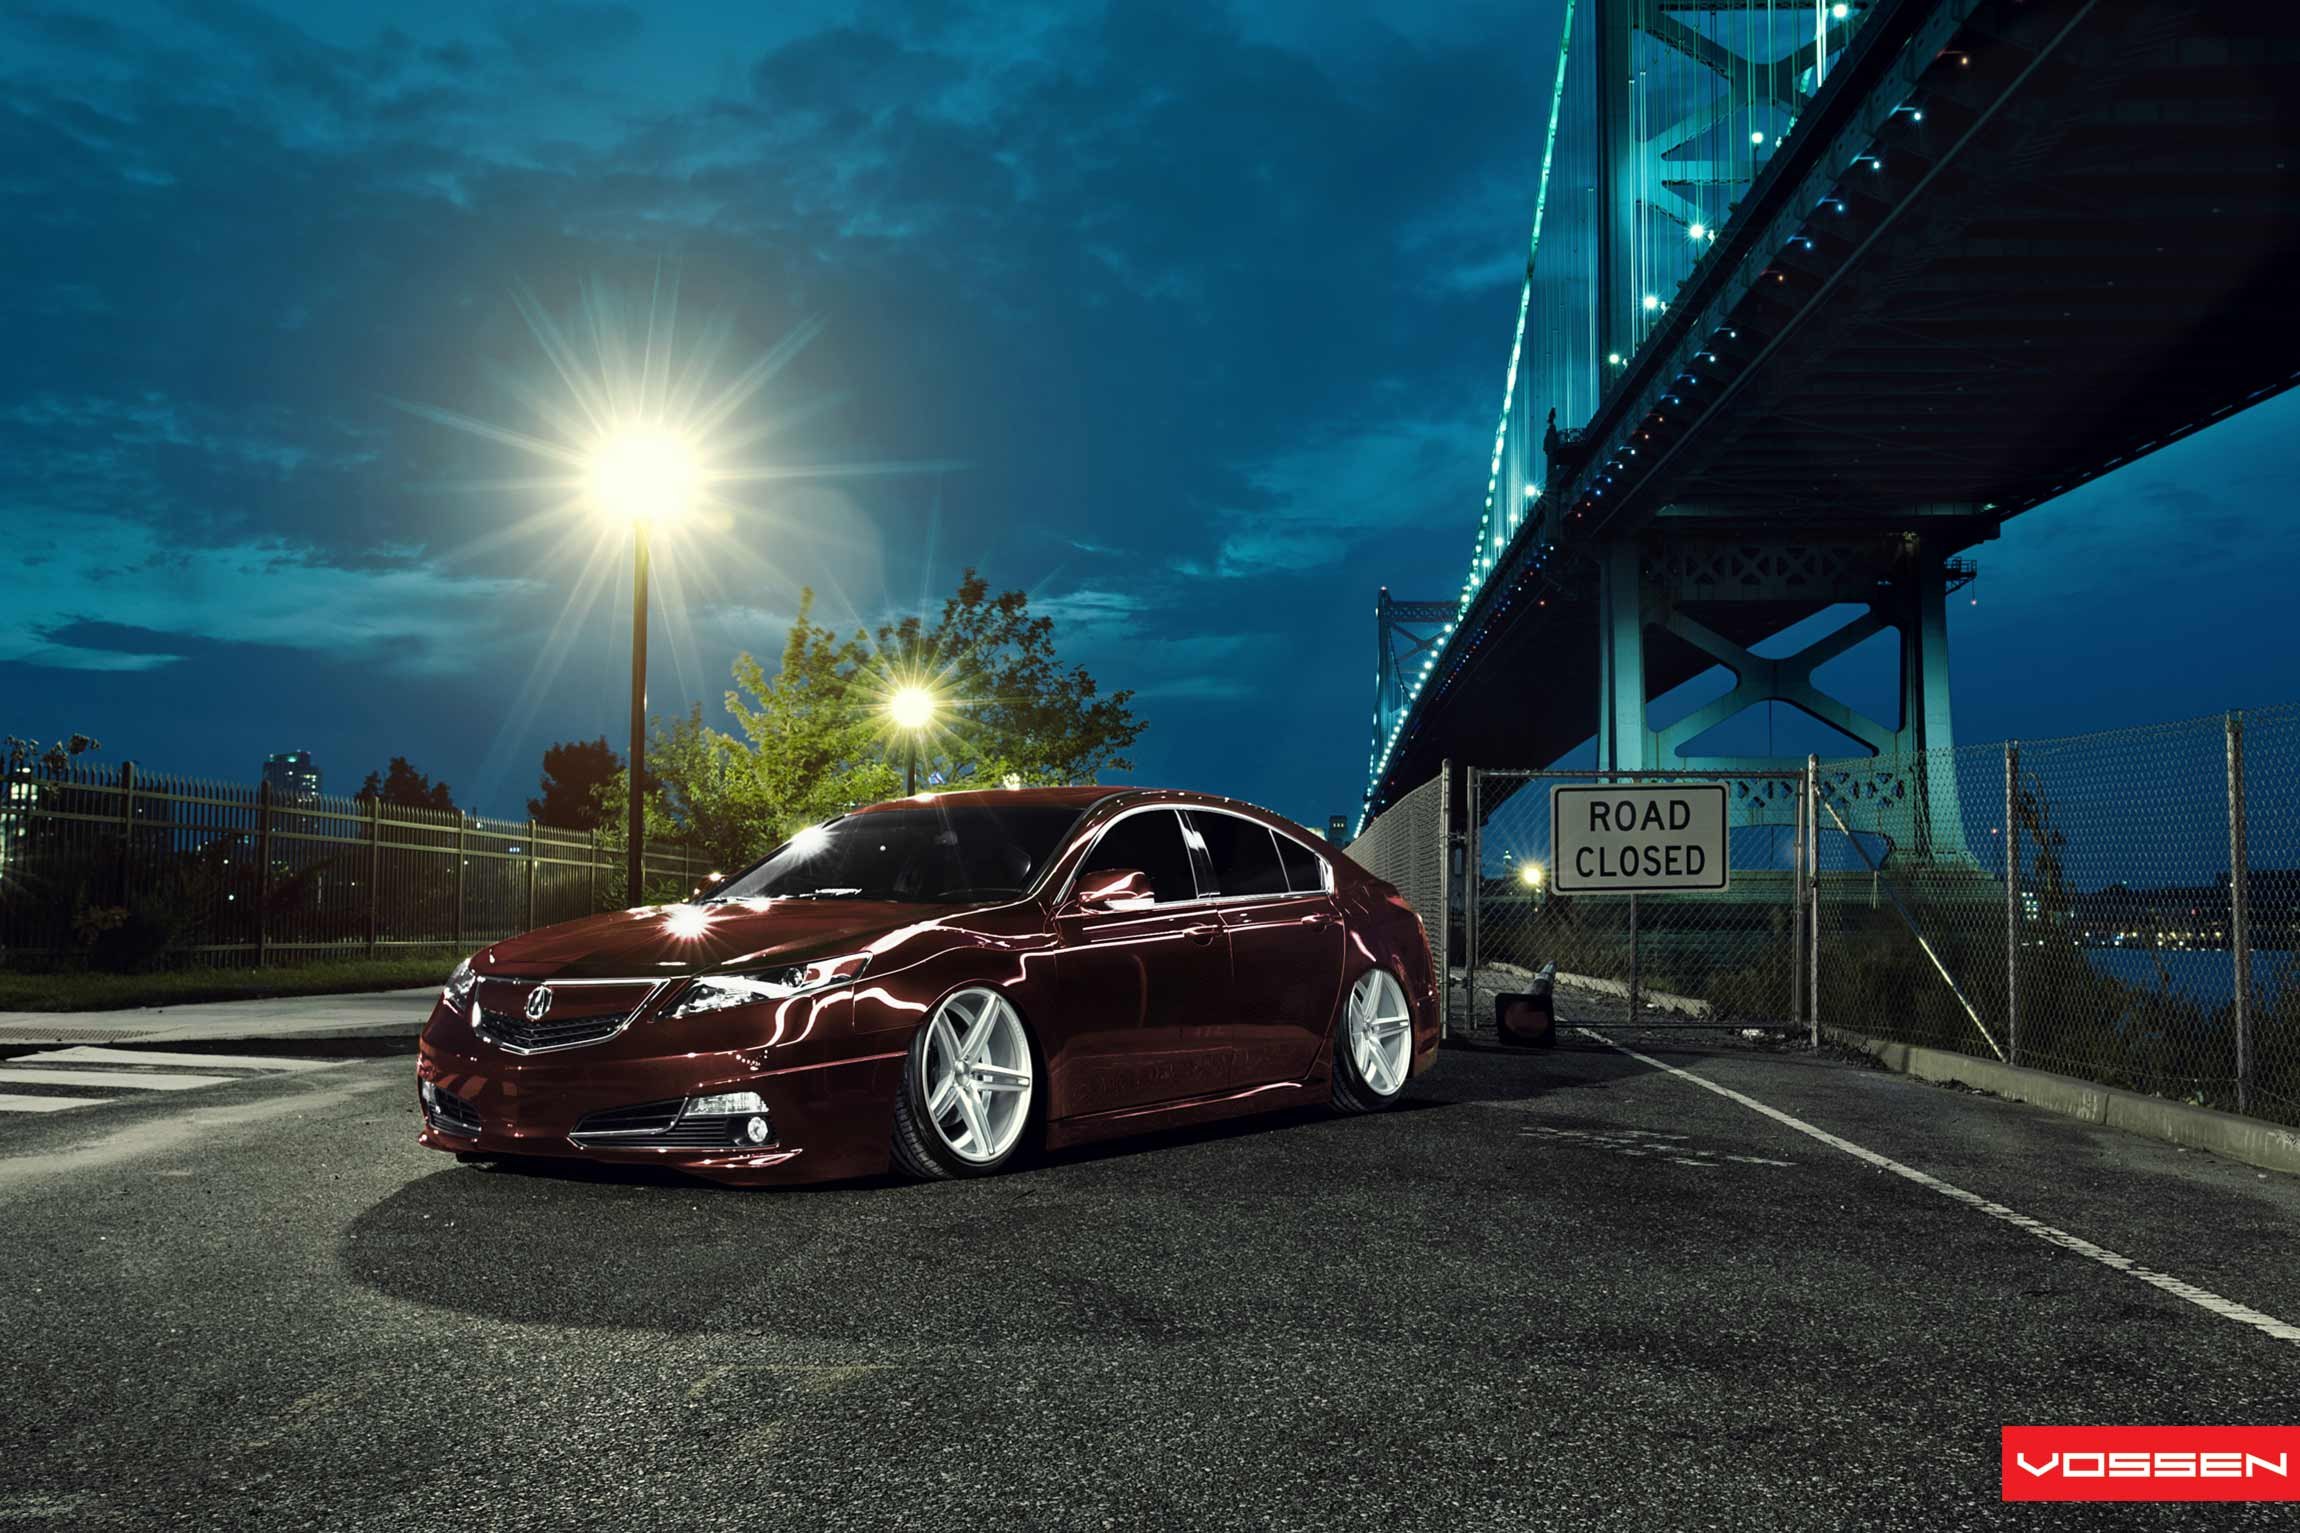 Custom Lowered Cherry Red Acura TL - Photo by Vossen